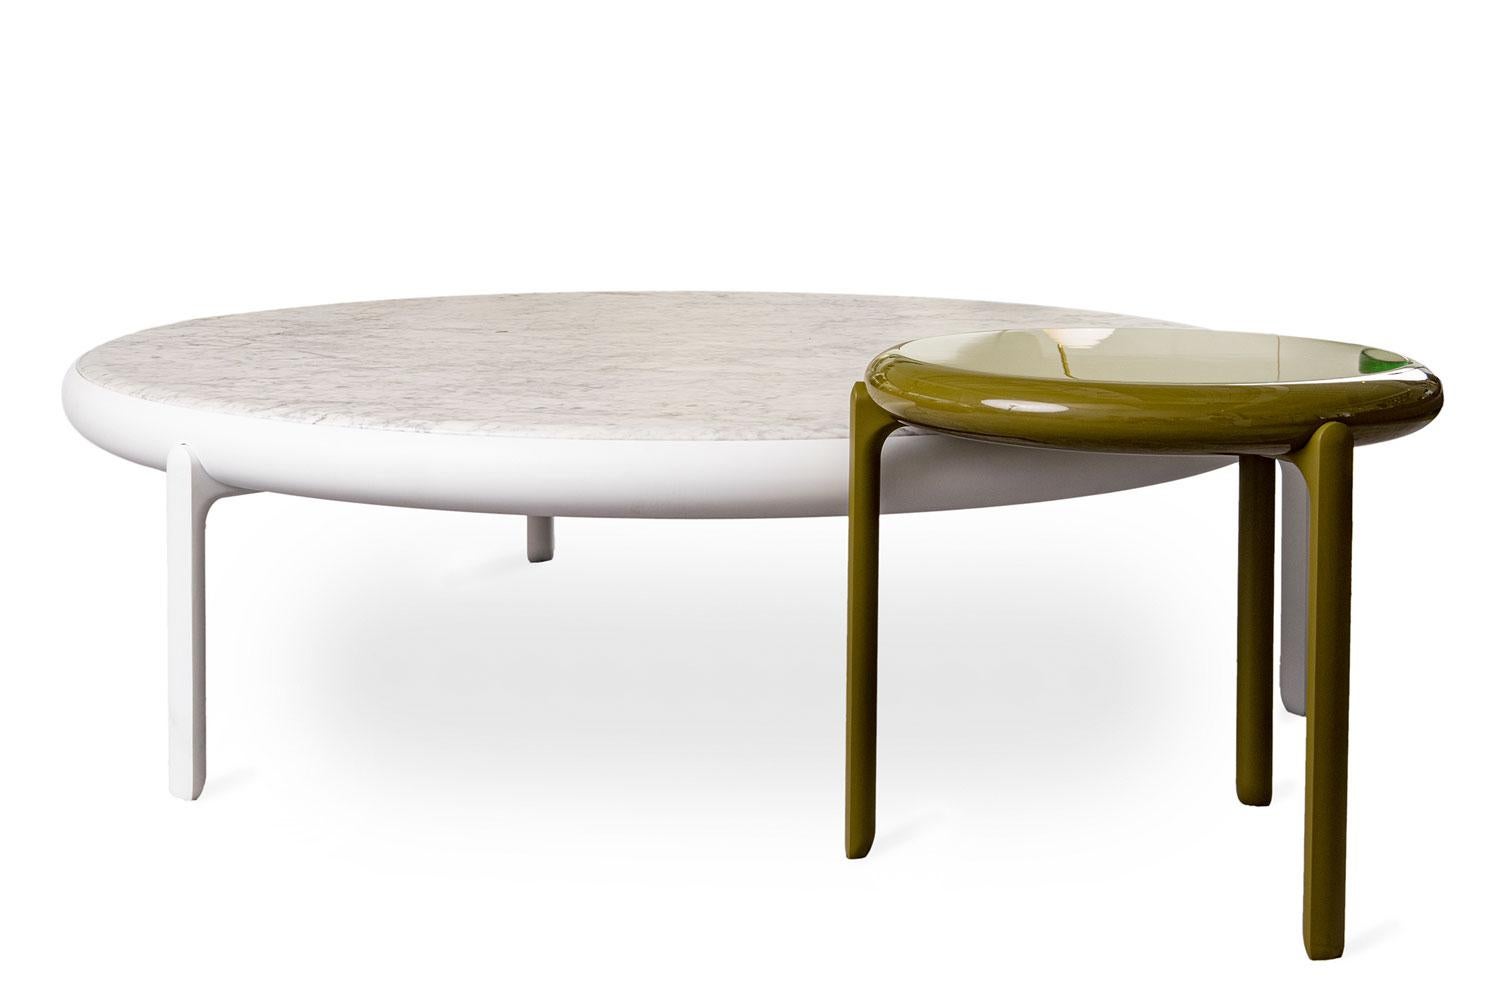 Italian Olive Glossy Lacquer Top Round Coffee Table by B&B Italia - Available Now  For Sale